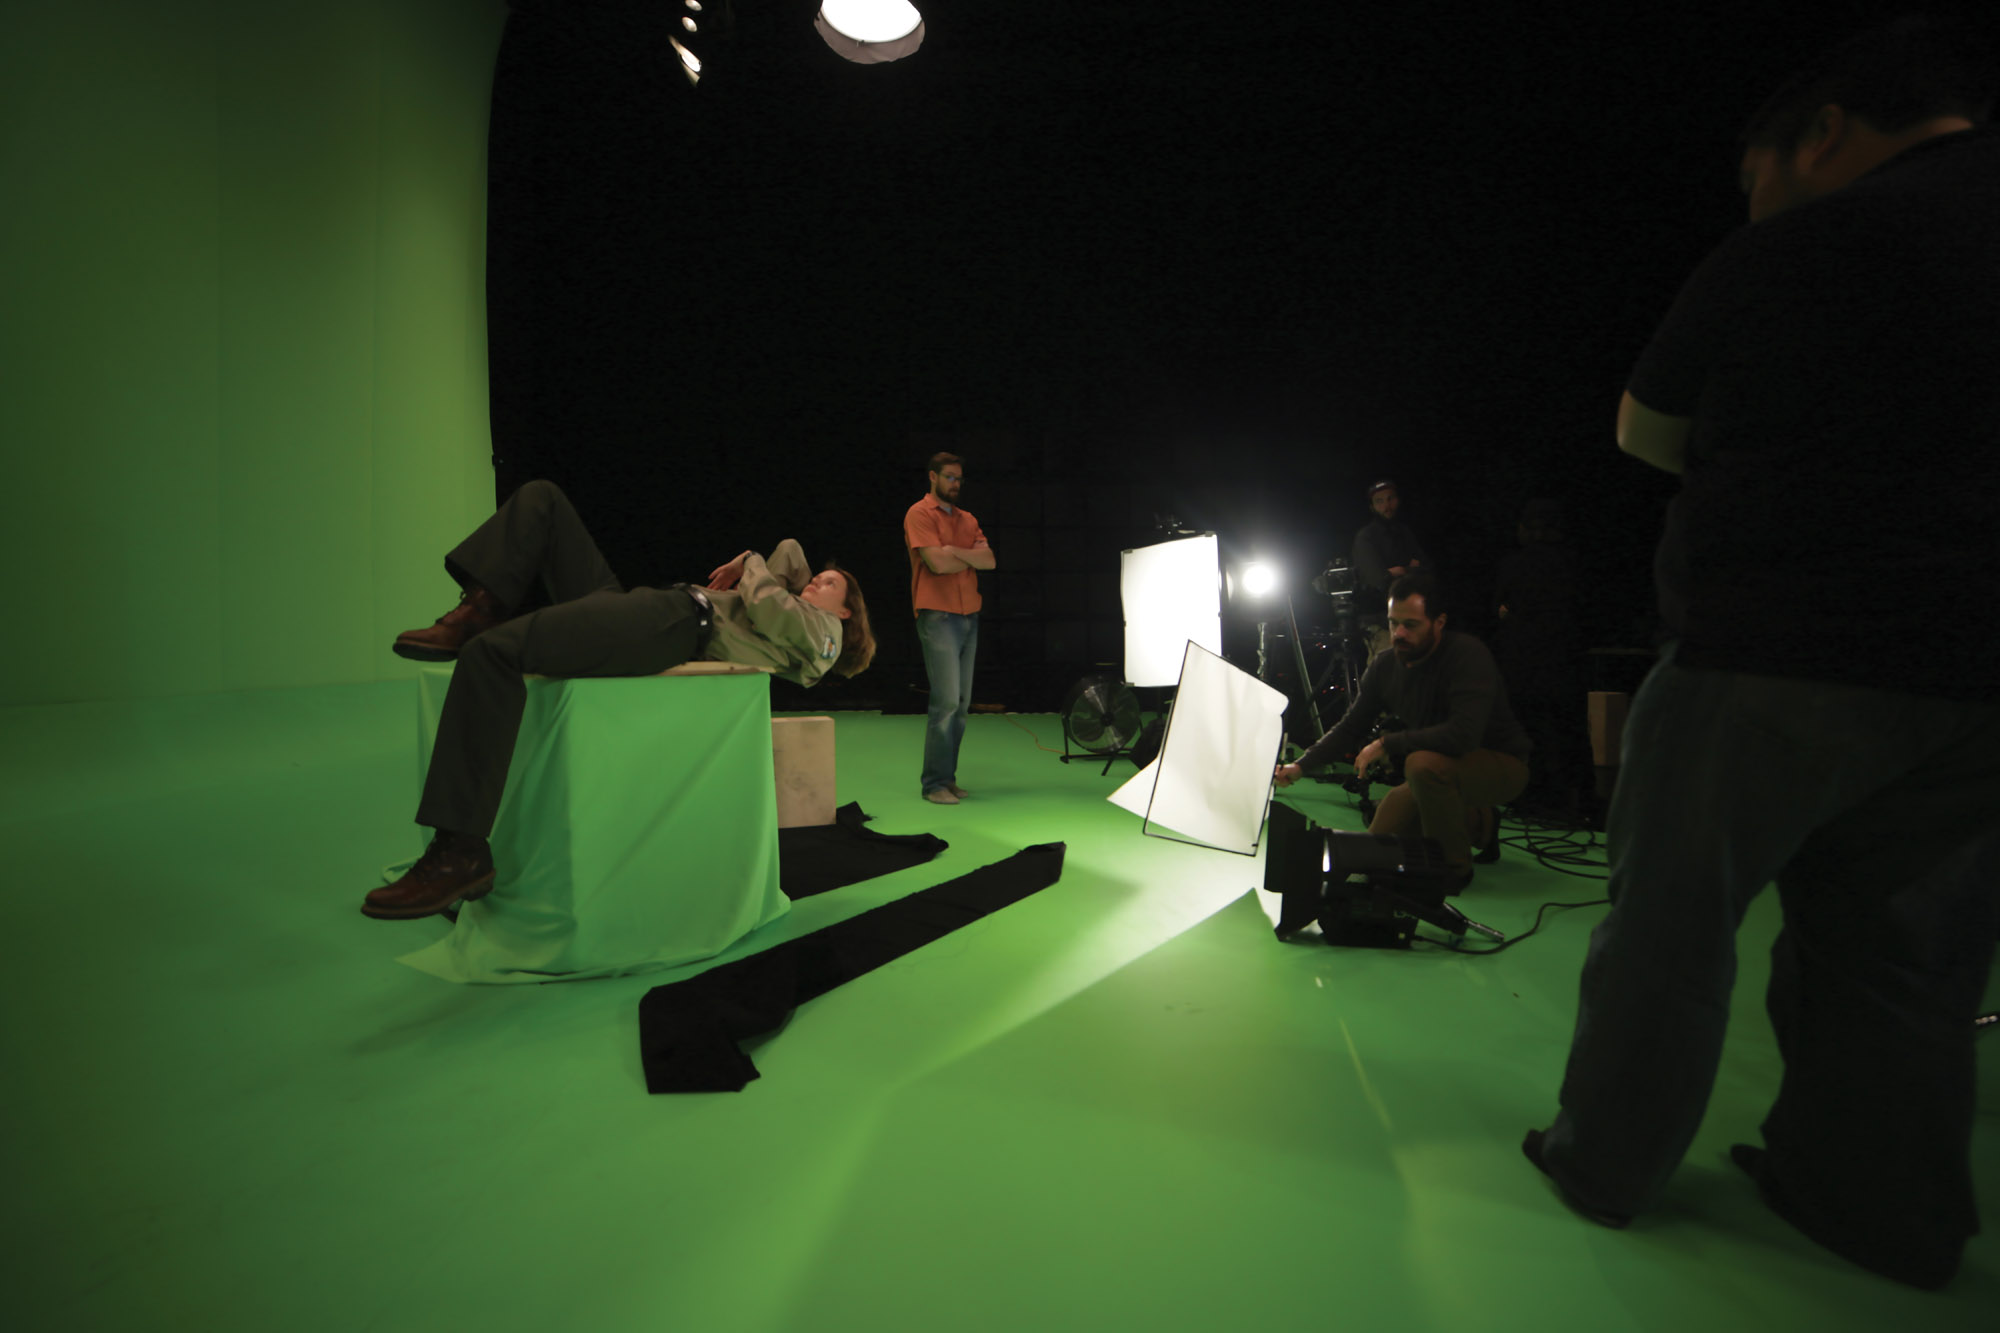 Five people doing various production tasks work around a woman laying on a green cube in green room. 